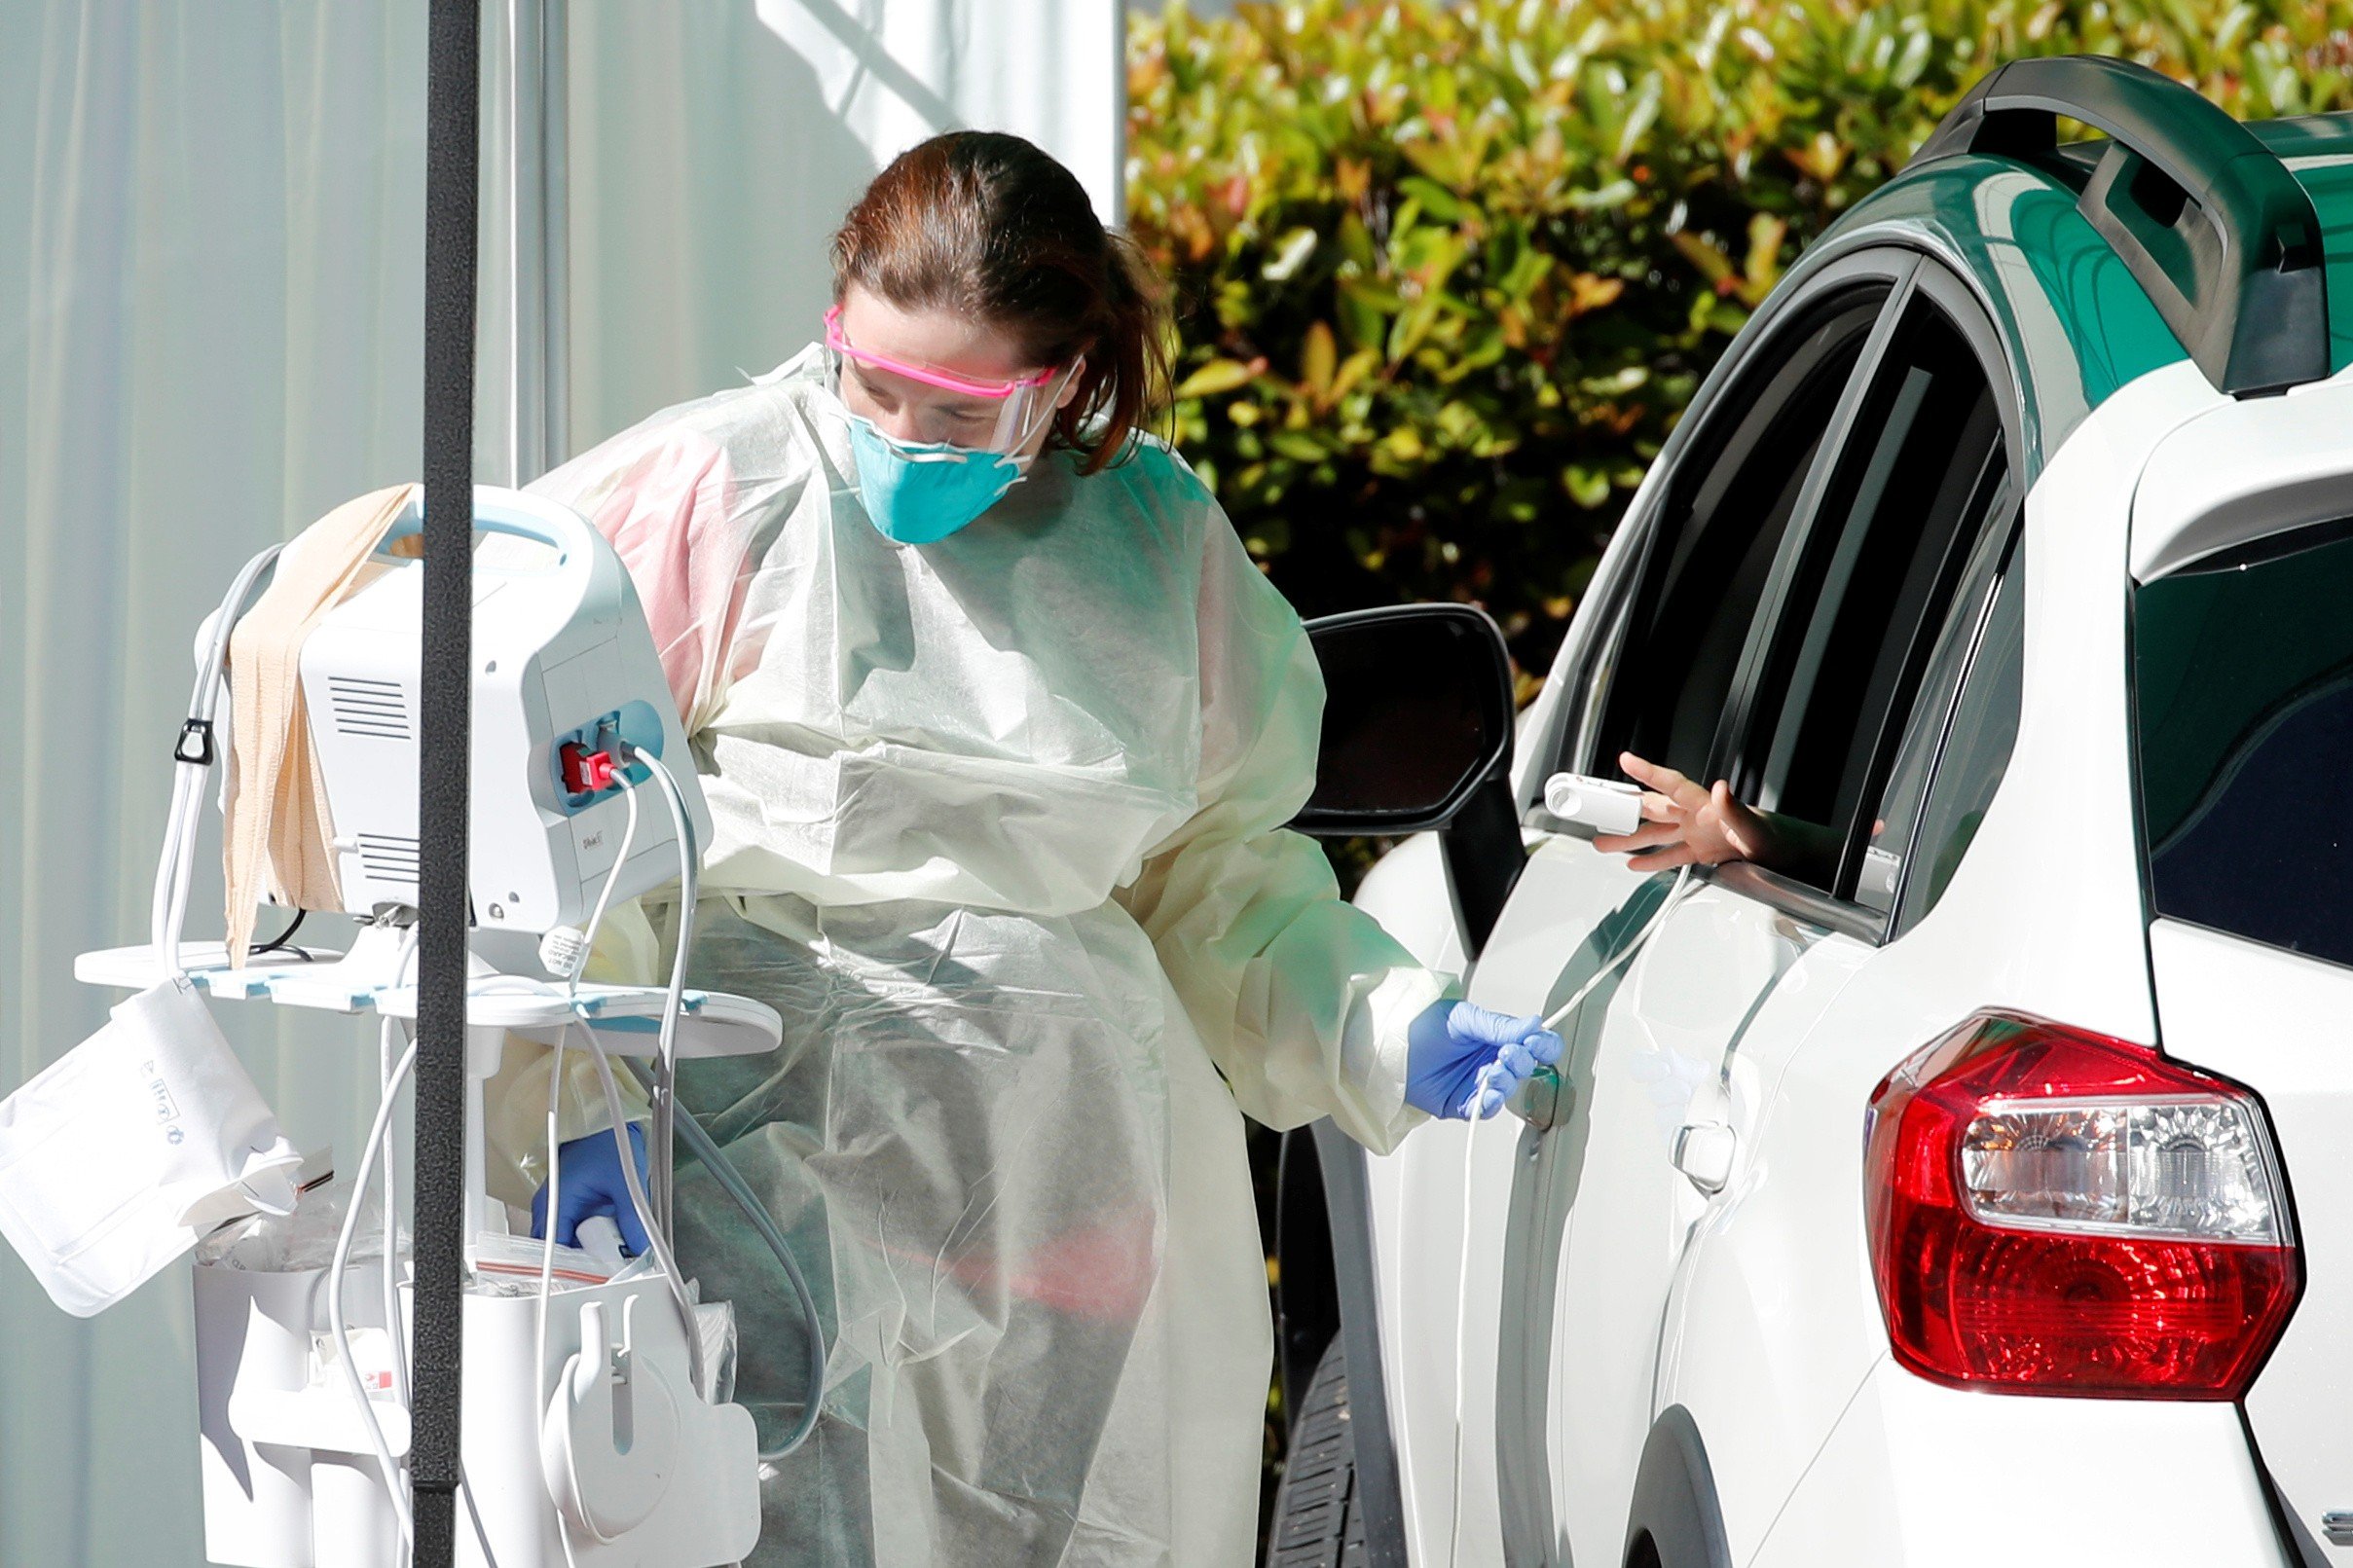 A healthcare worker attends to a person in the back of a vehicle at the Scripps Clinic as they provide drive-up care due to the global outbreak of the coronavirus disease (COVID-19) in La Jolla, California, U.S., March 17, 2020. REUTERS/Mike Blake